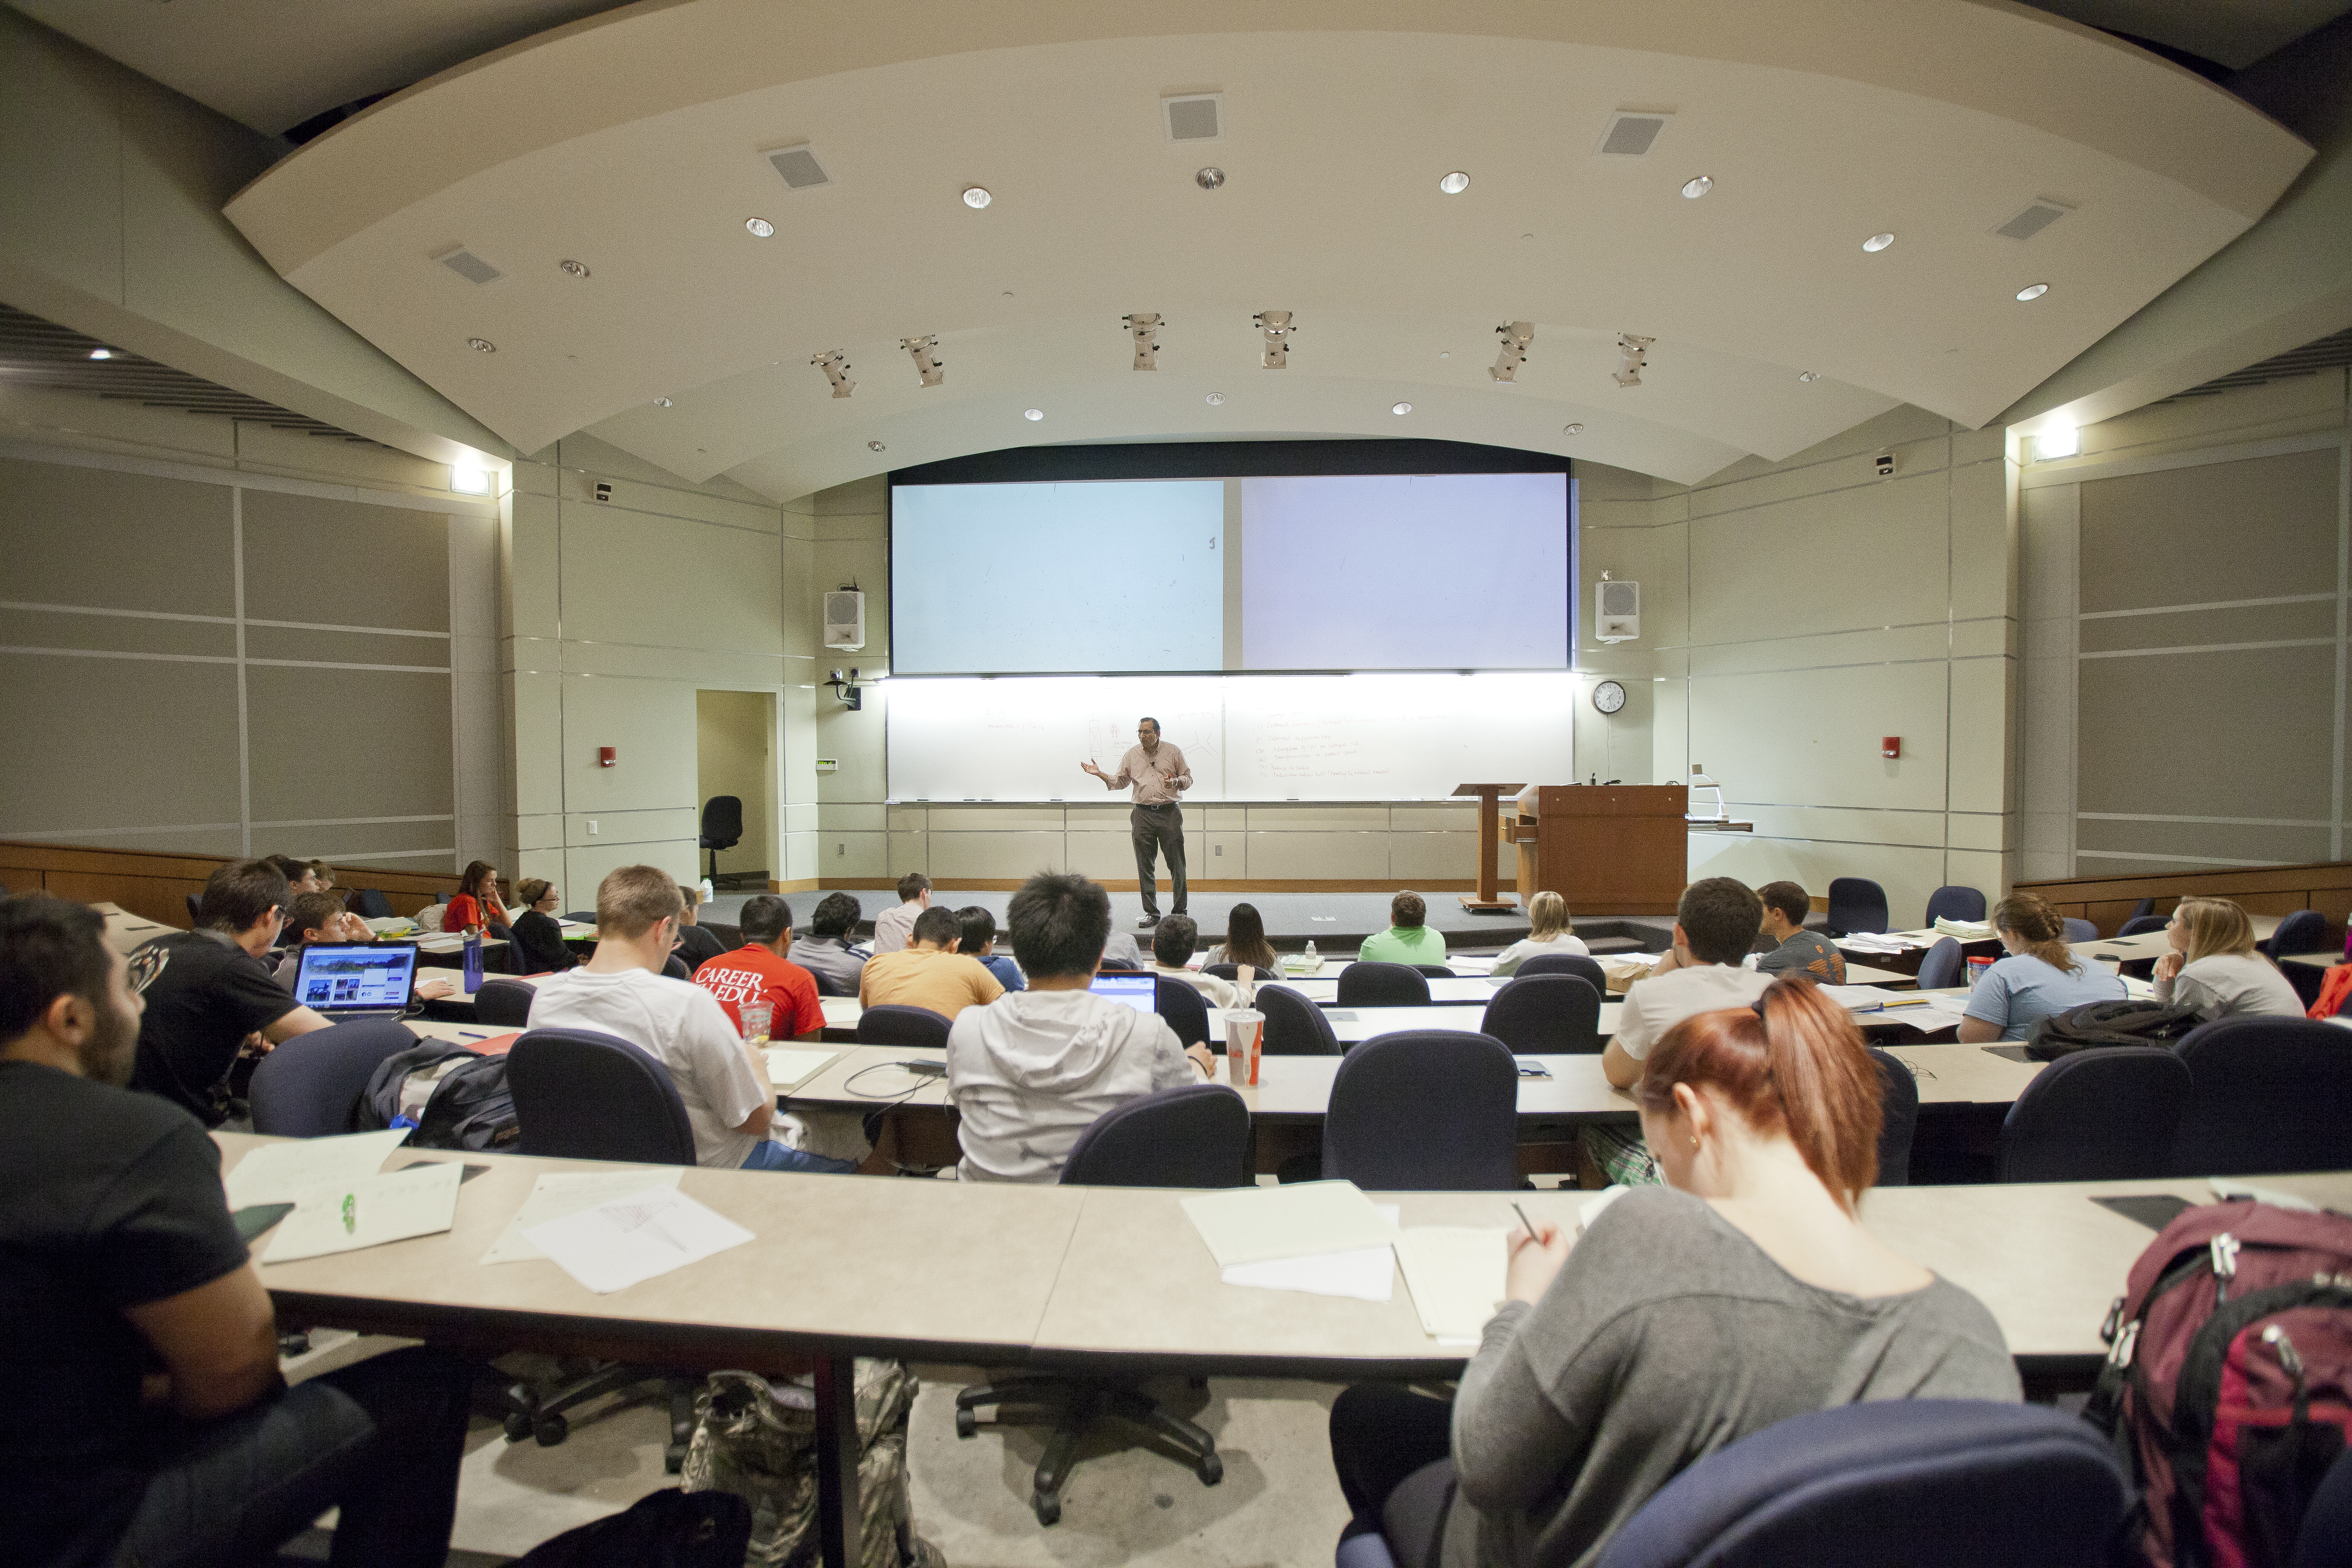 An instructor lectures in an Eaton Hall classroom